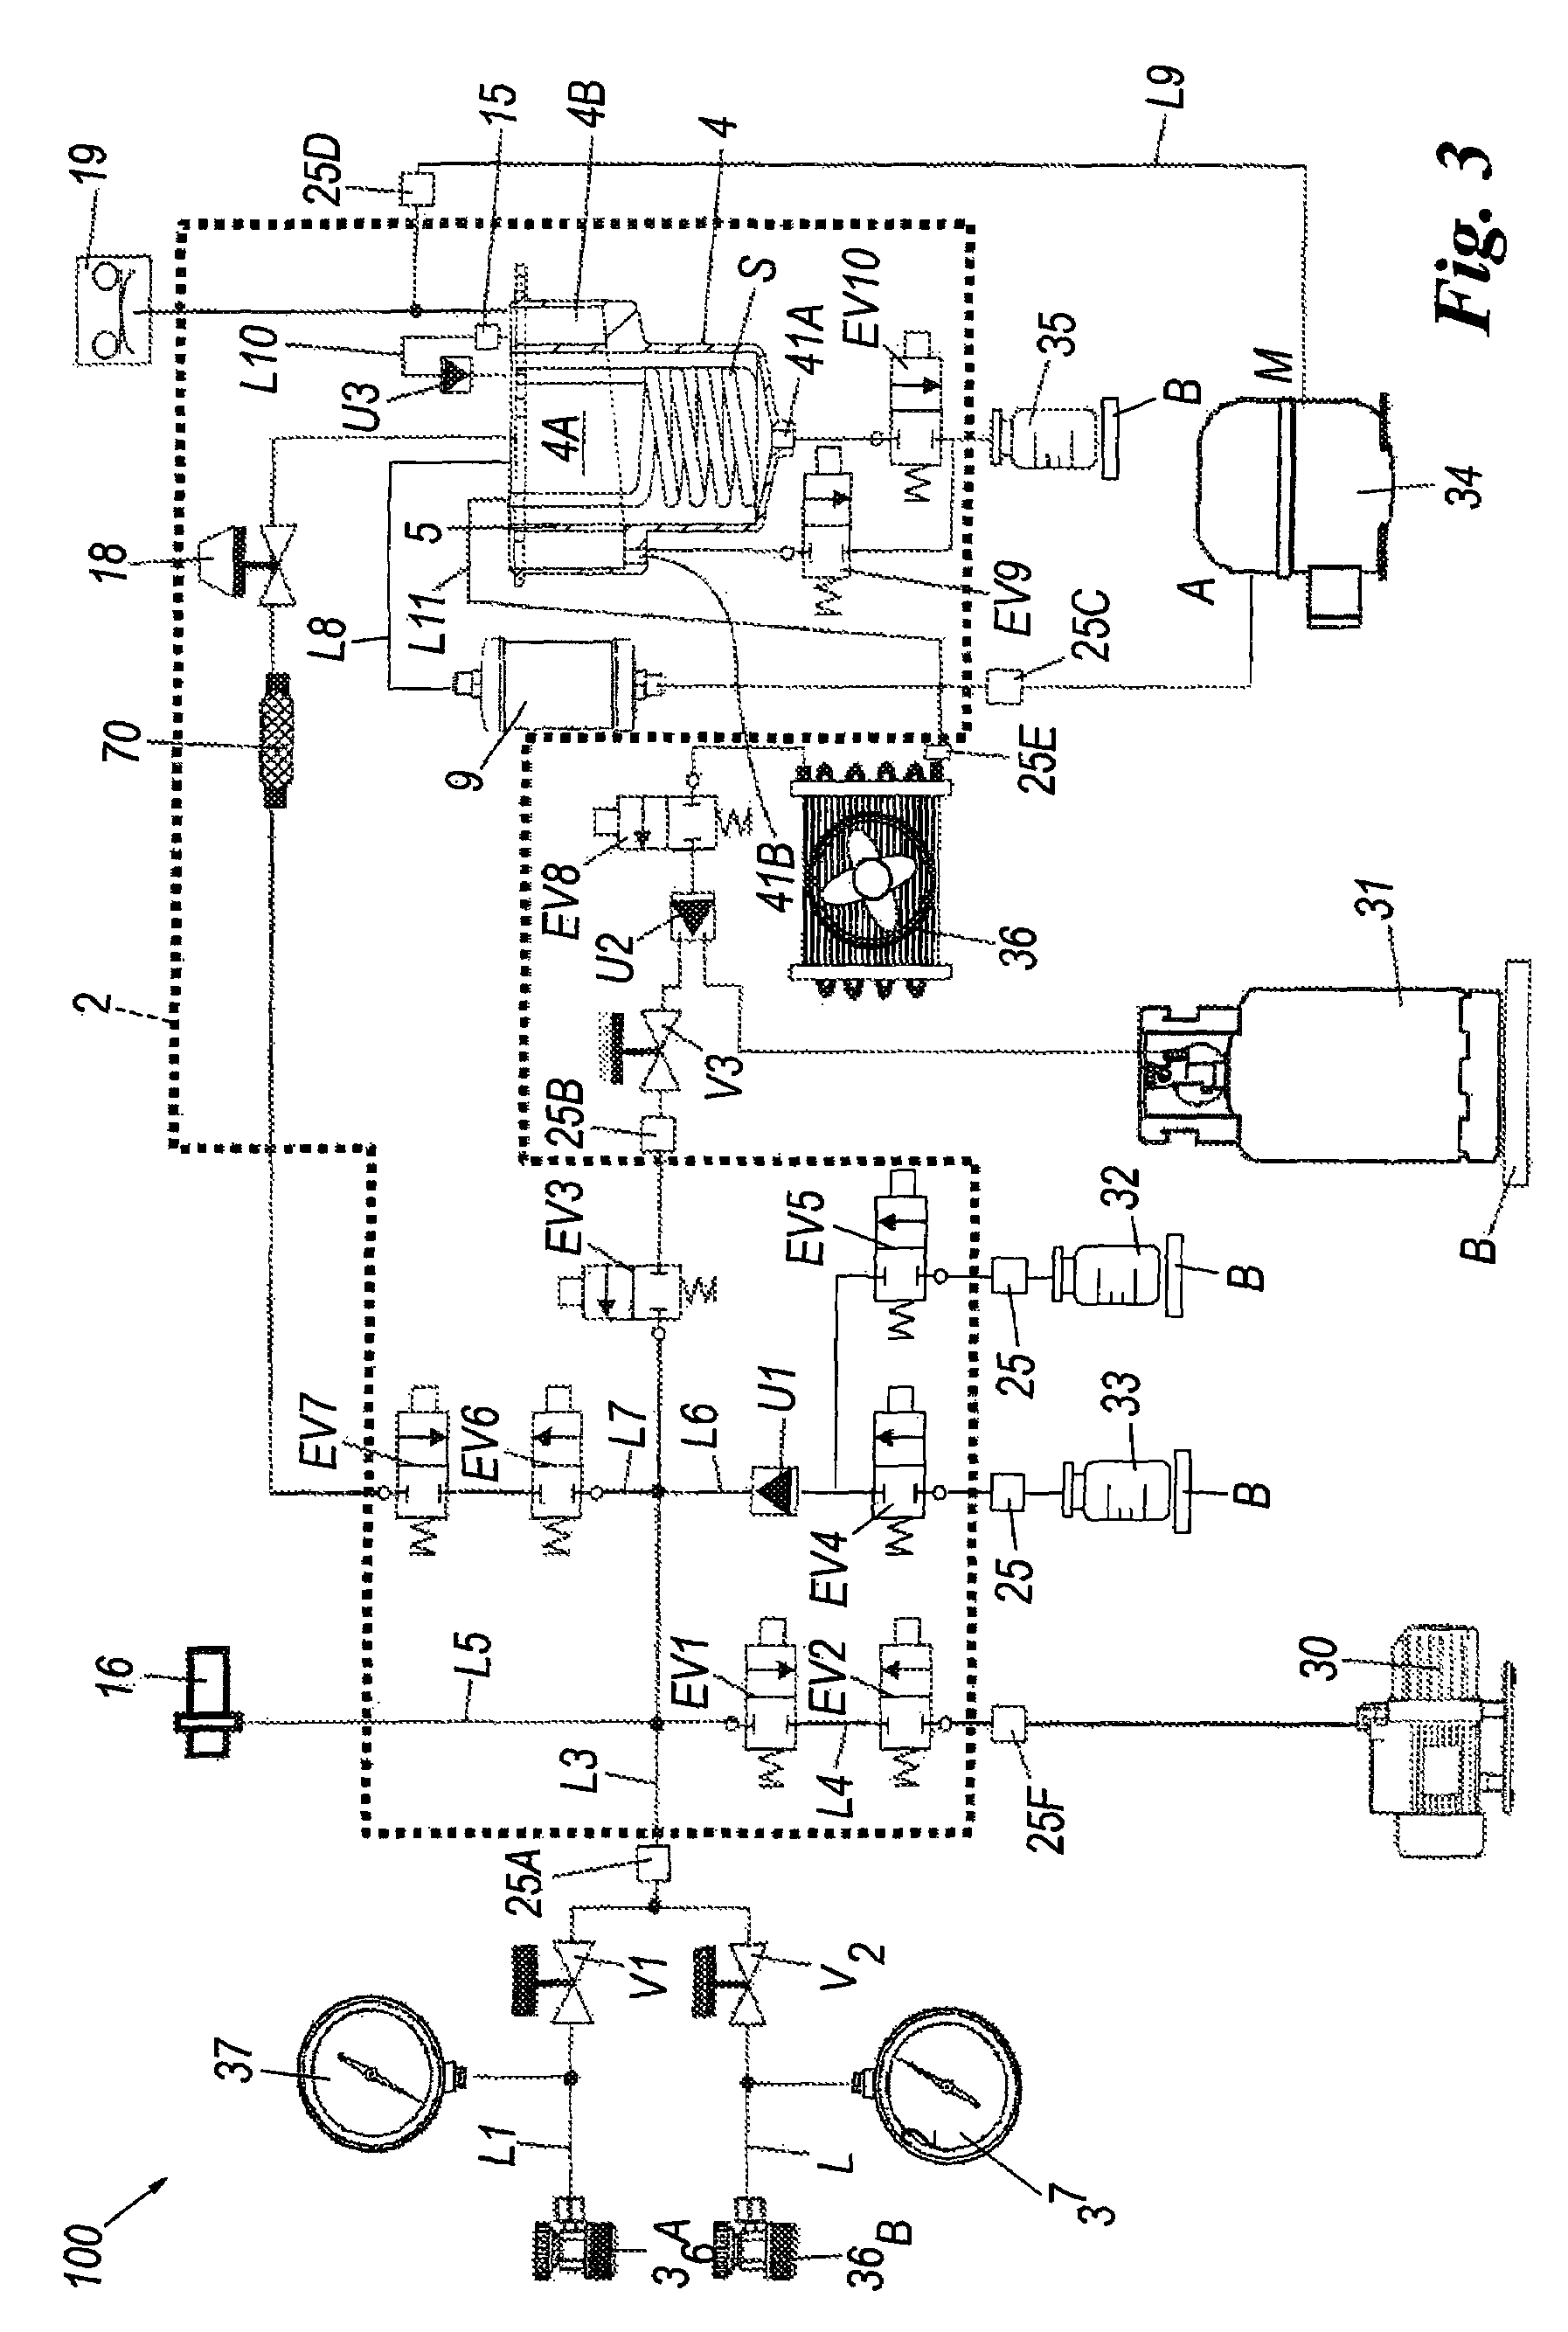 Refrigerant accumulation and oil recovery device for refrigerant fluid recovery/regeneration/recharging systems